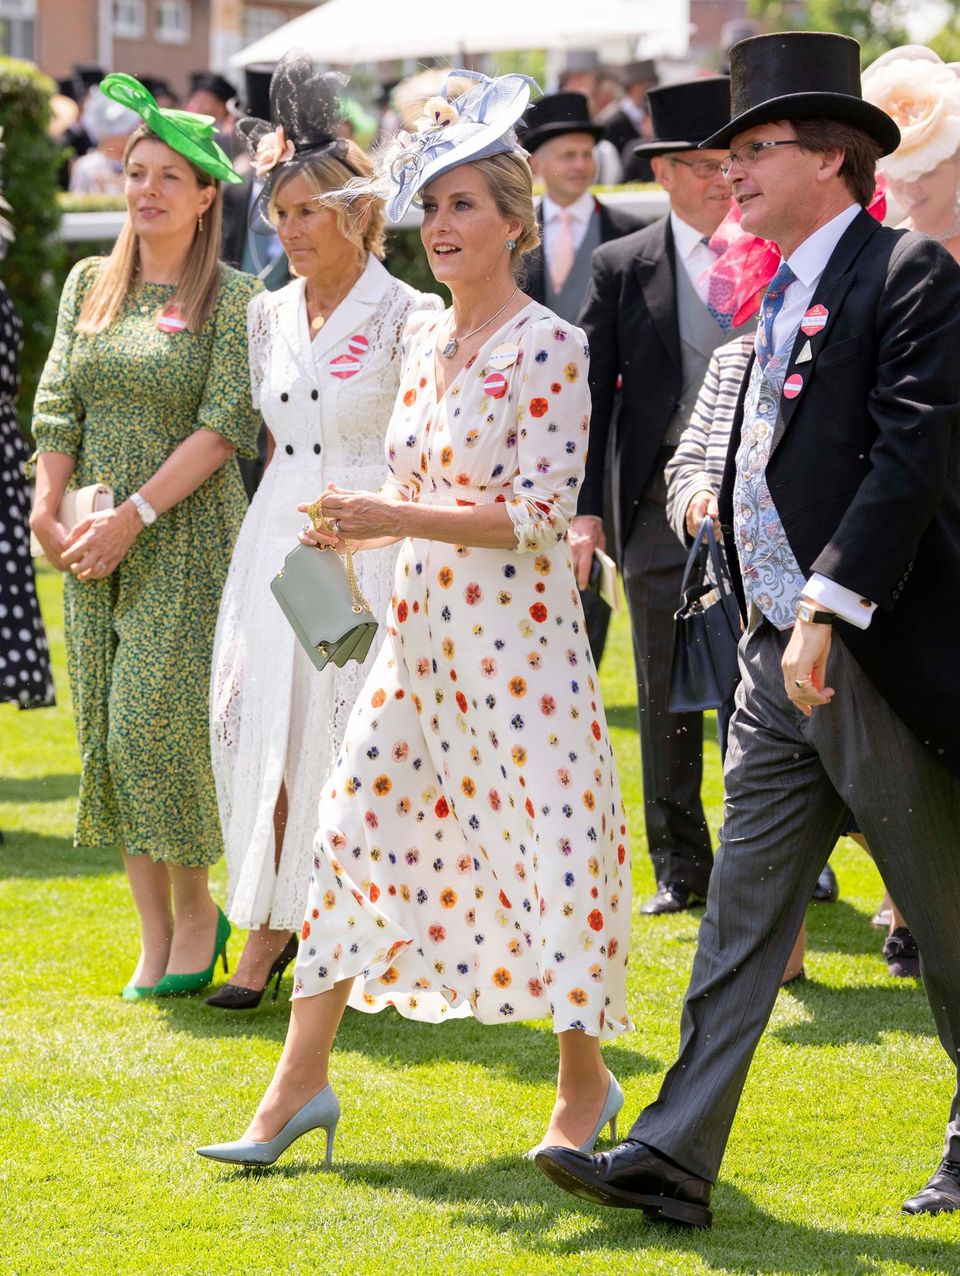 A precision landing: on the third day of the Royal Ascot horse race, Duchess Sophie puts on a colorful polka dot dress that makes her look much fresher and younger.  The light blue hat, the lime green bag, with matching shoes are other color accents that harmonize perfectly. 